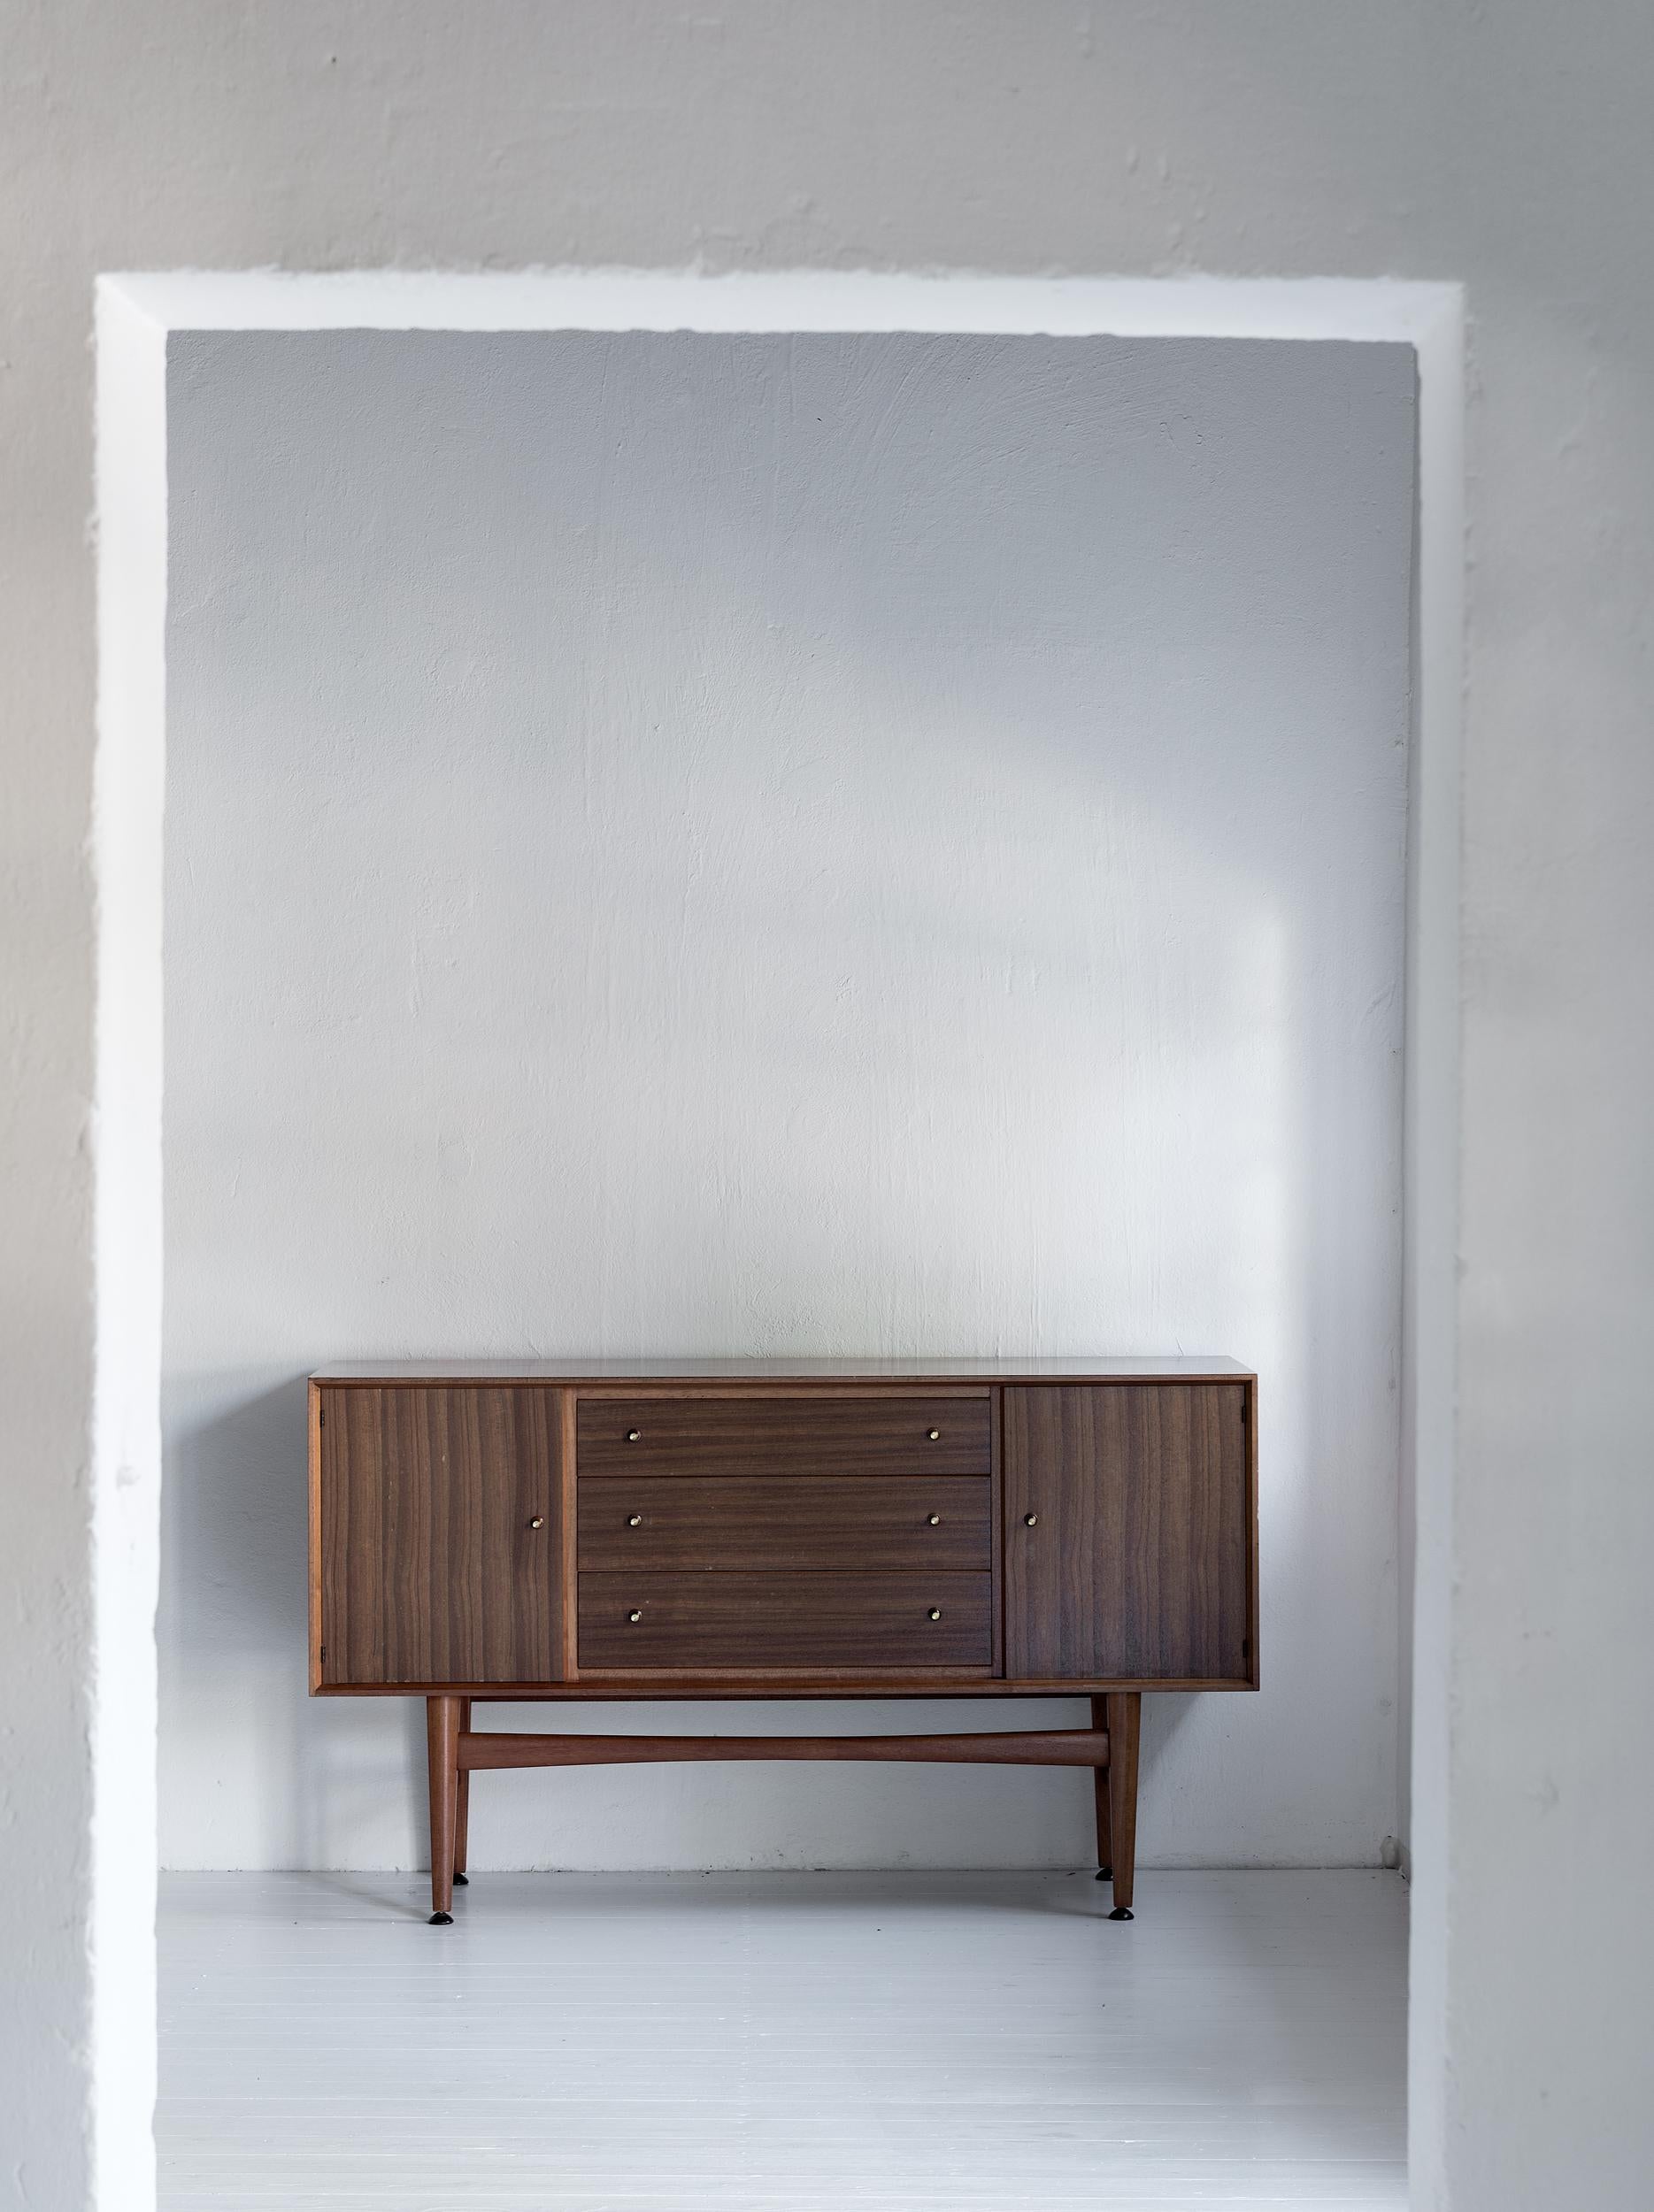 Beautiful rare sideboard by Gordon Russell in teak. Two spacious compartments with adjustable shelving flank three drawers. Superbly finished with the signature teak and brass trumpet style handles. In great condition and very chic. 

Gordon